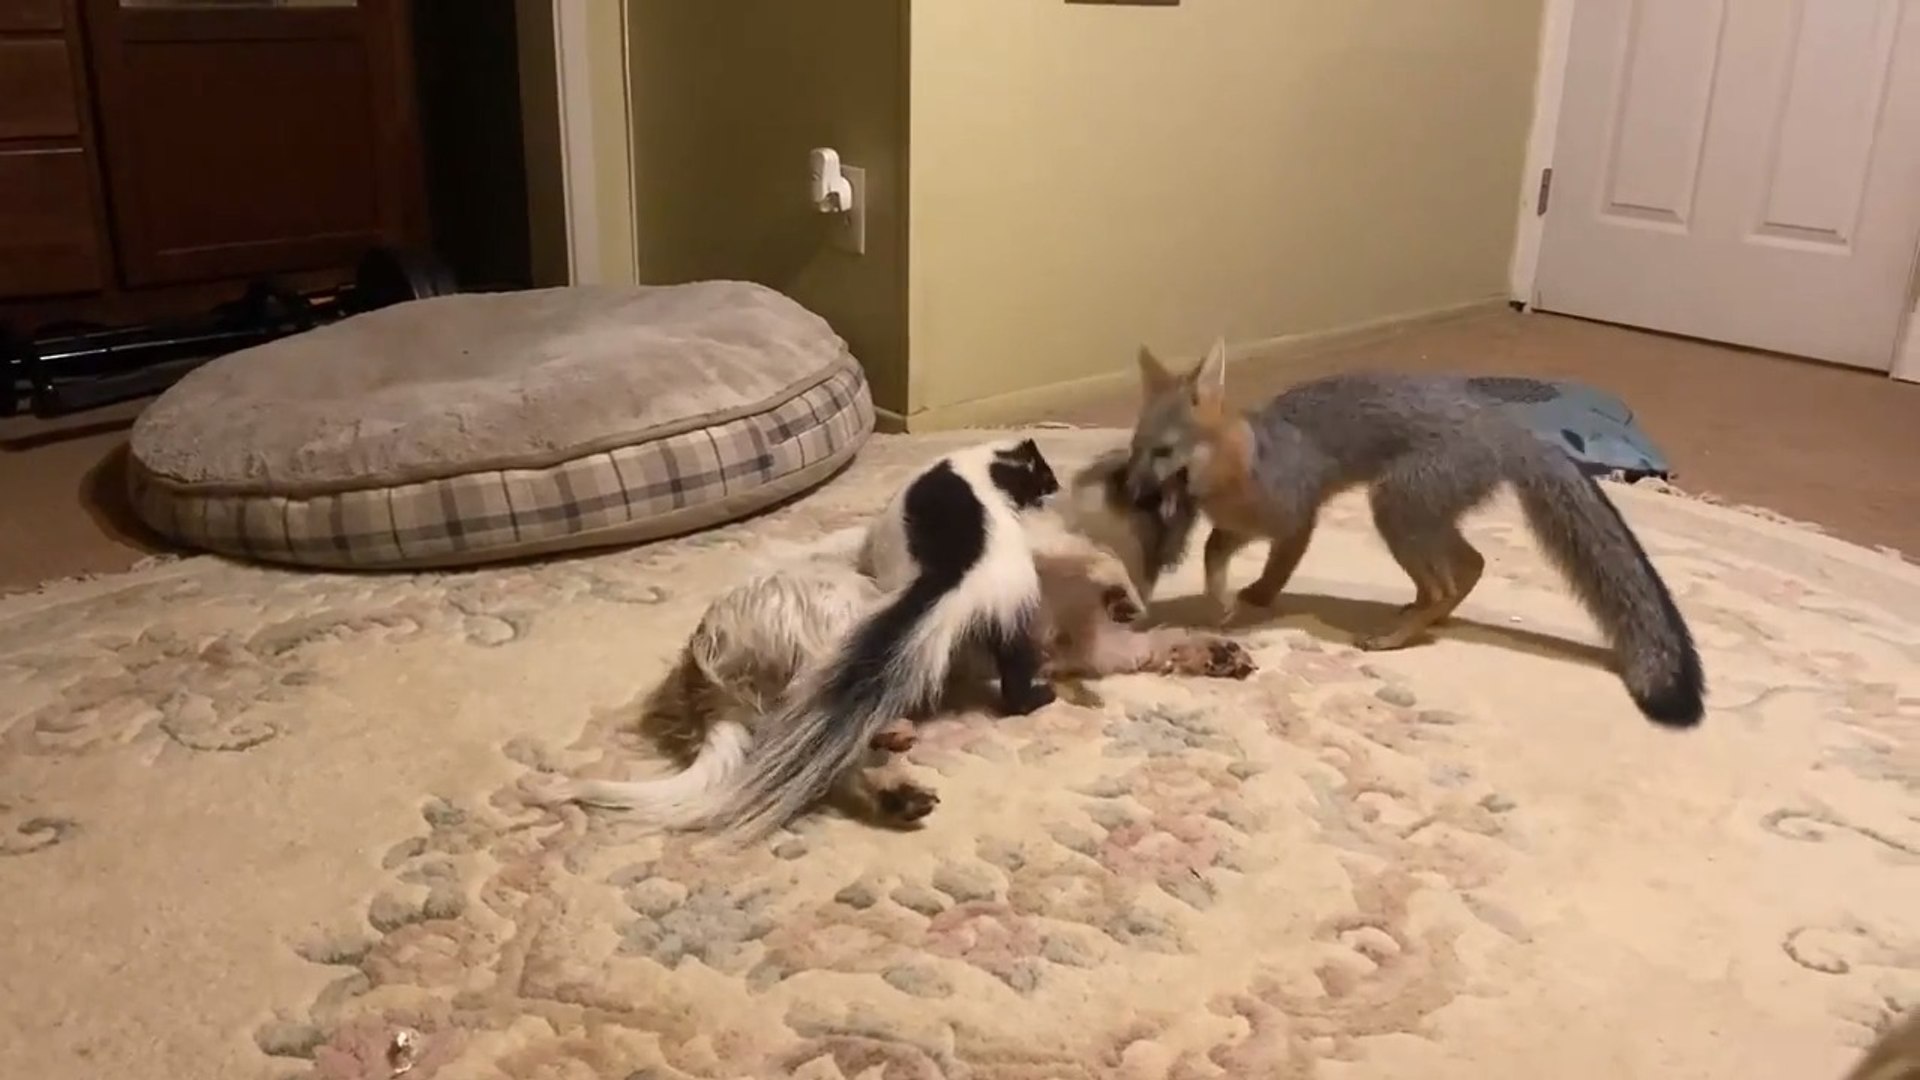 Dog Plays With Fox and Skunk Inside House